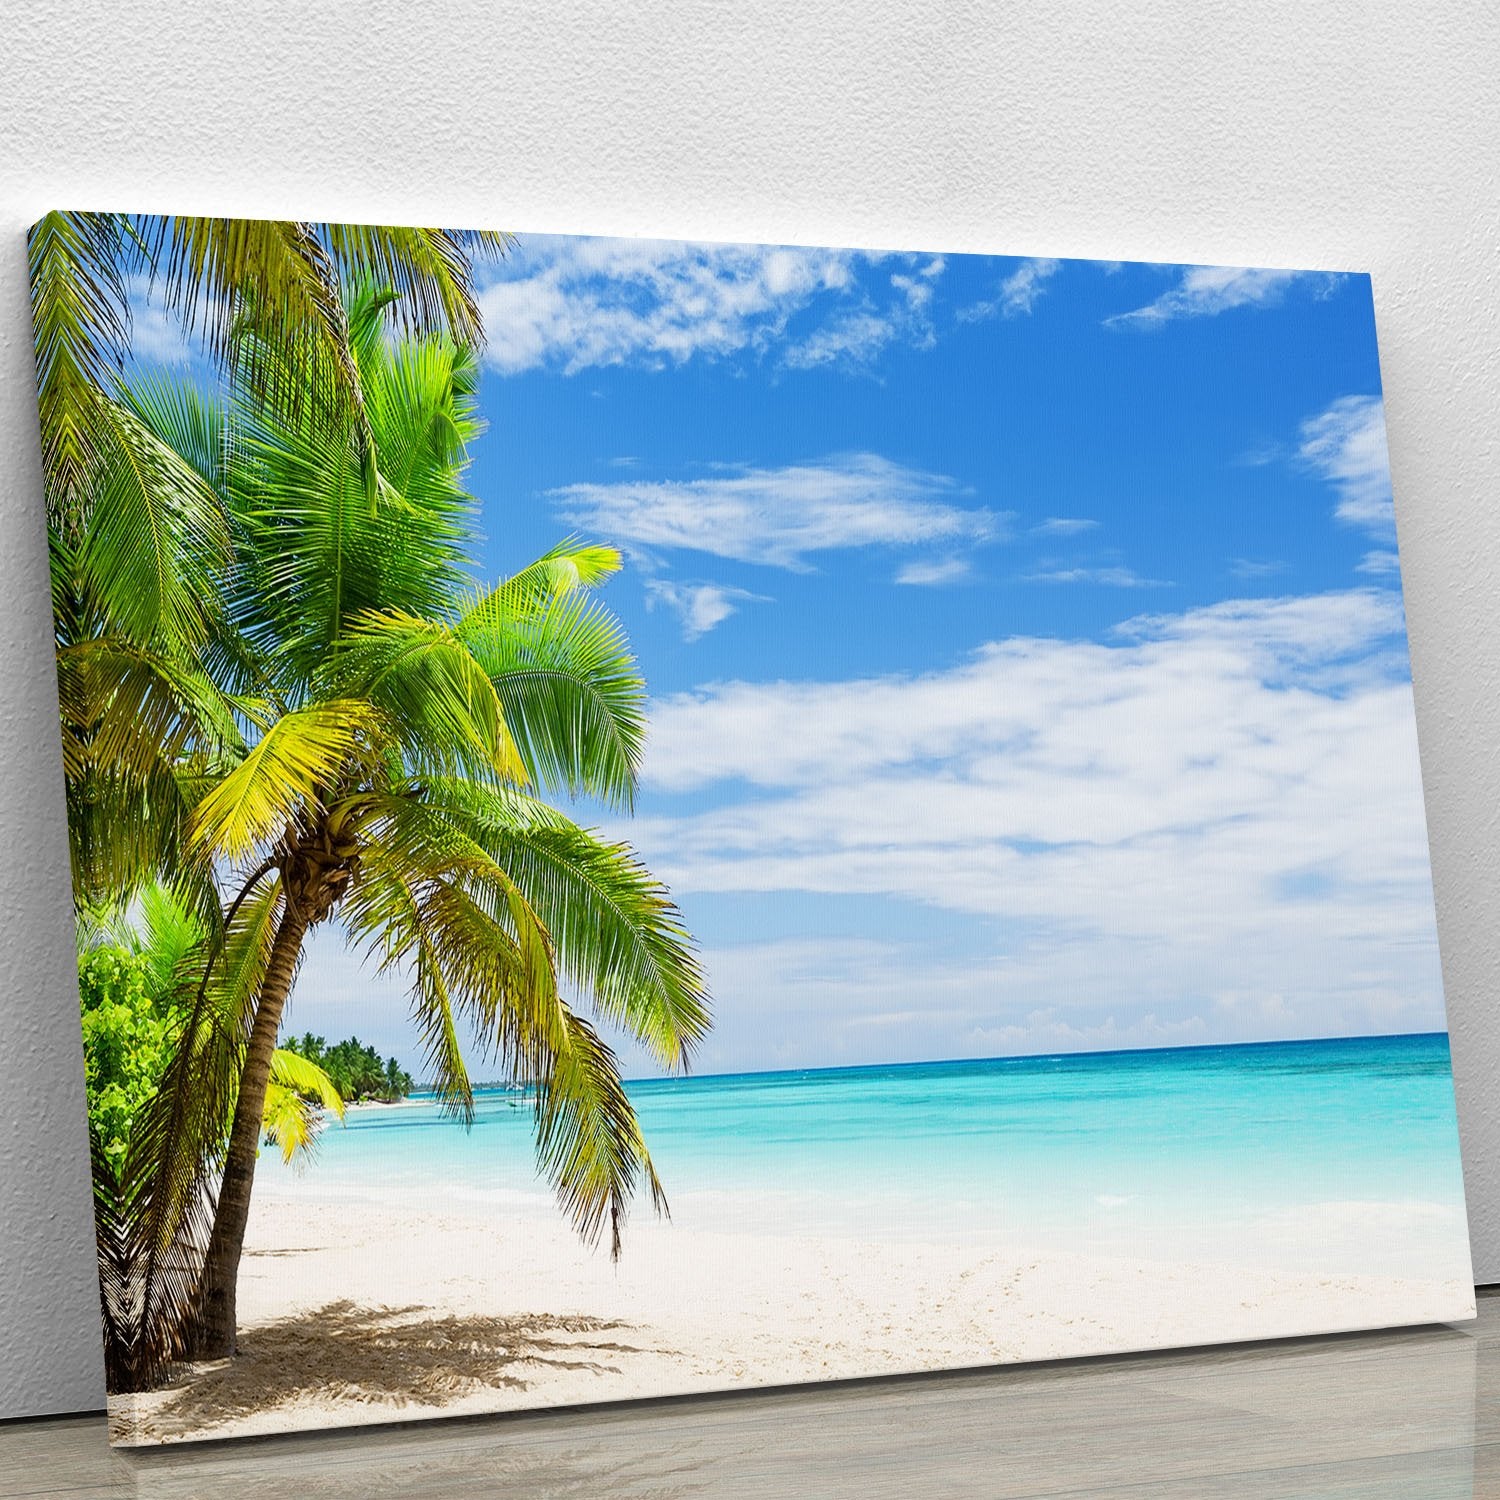 Coconut Palm trees on white sandy beach Canvas Print or Poster